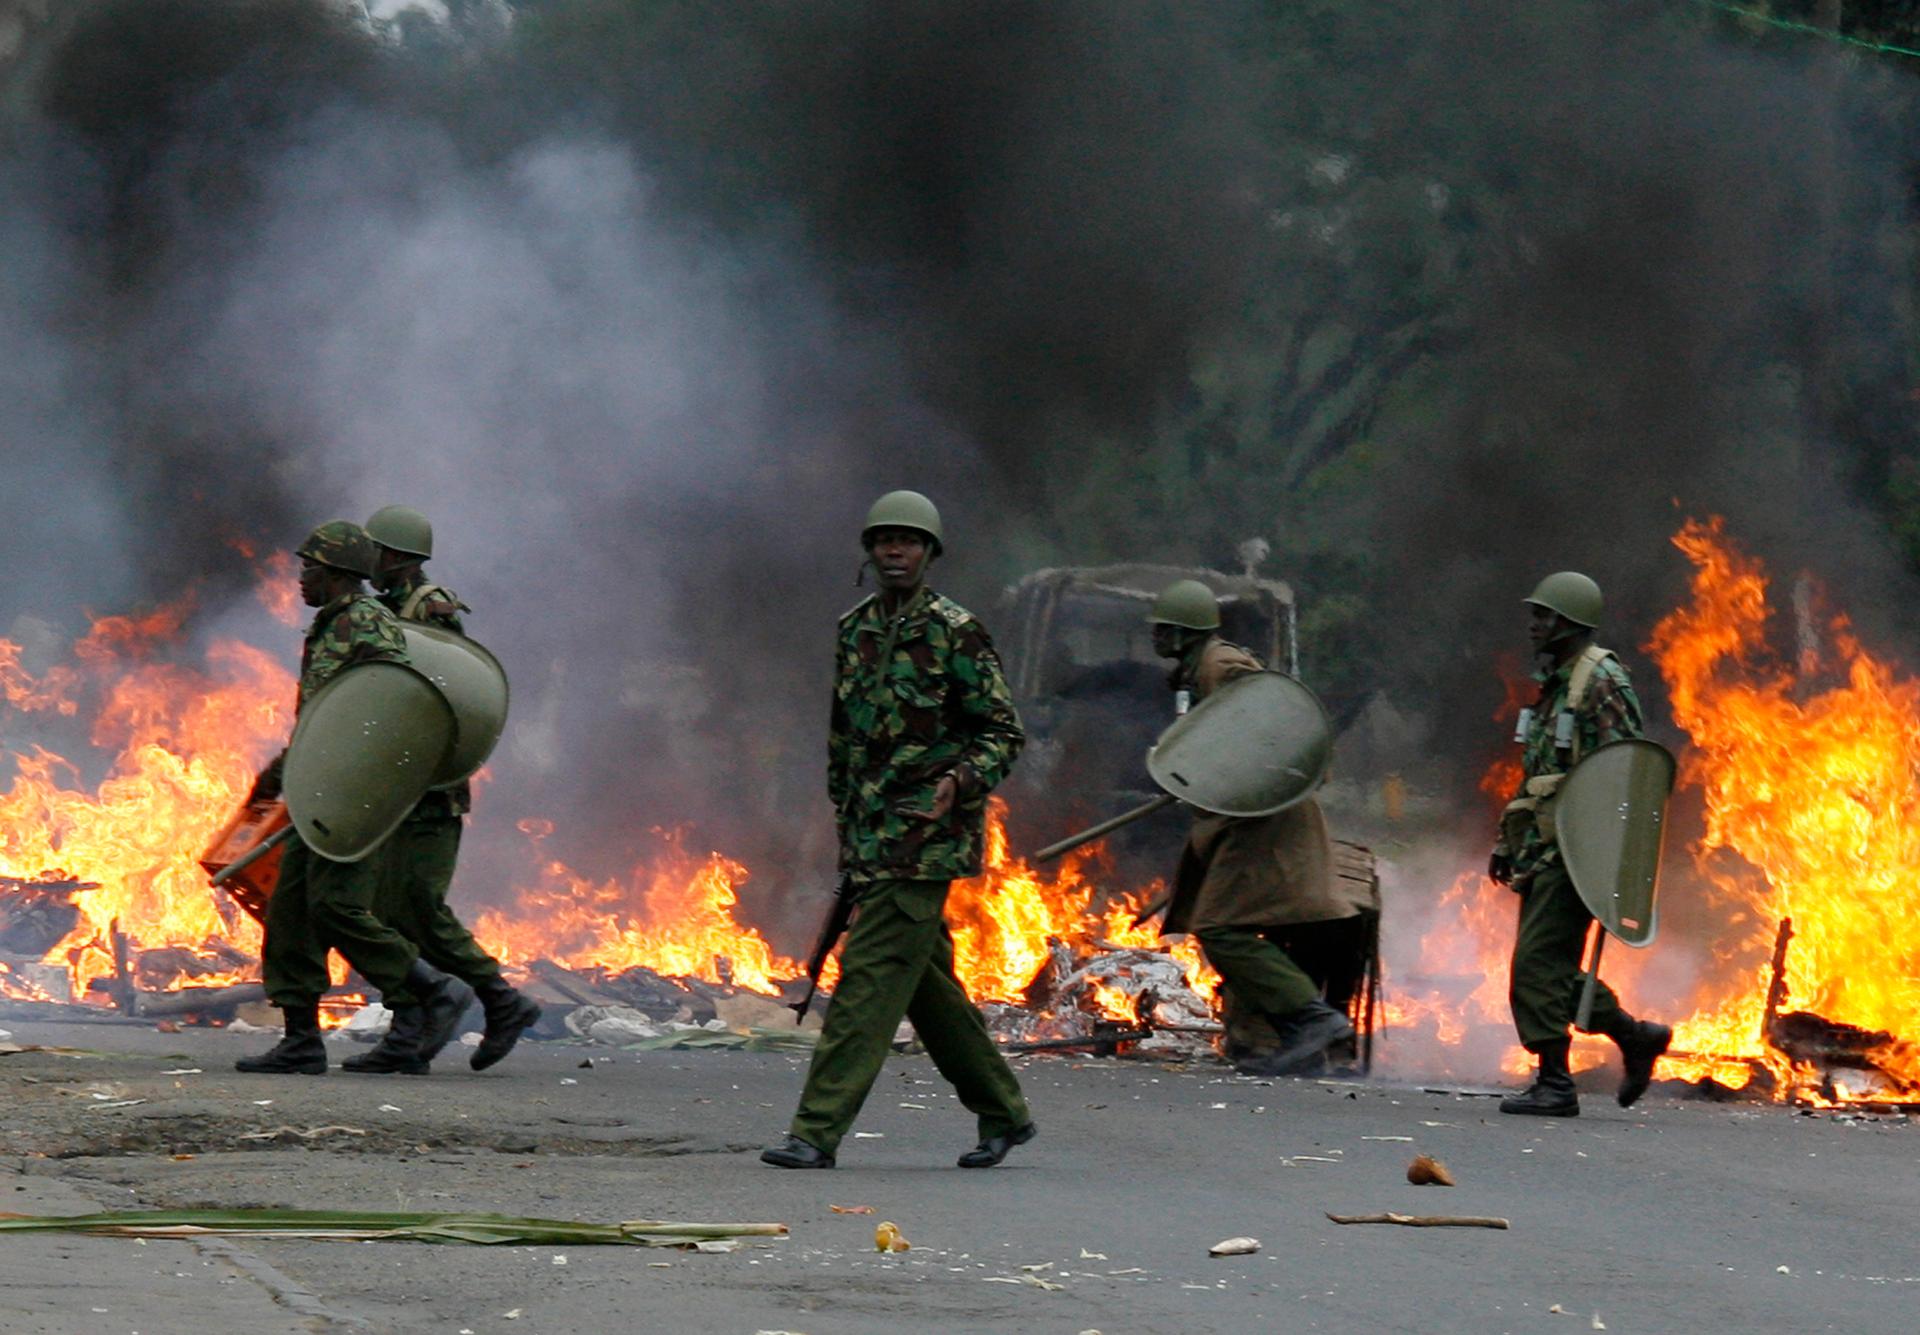 Riot police move to dismantle a burning roadblock in Nairobi December 31, 2007